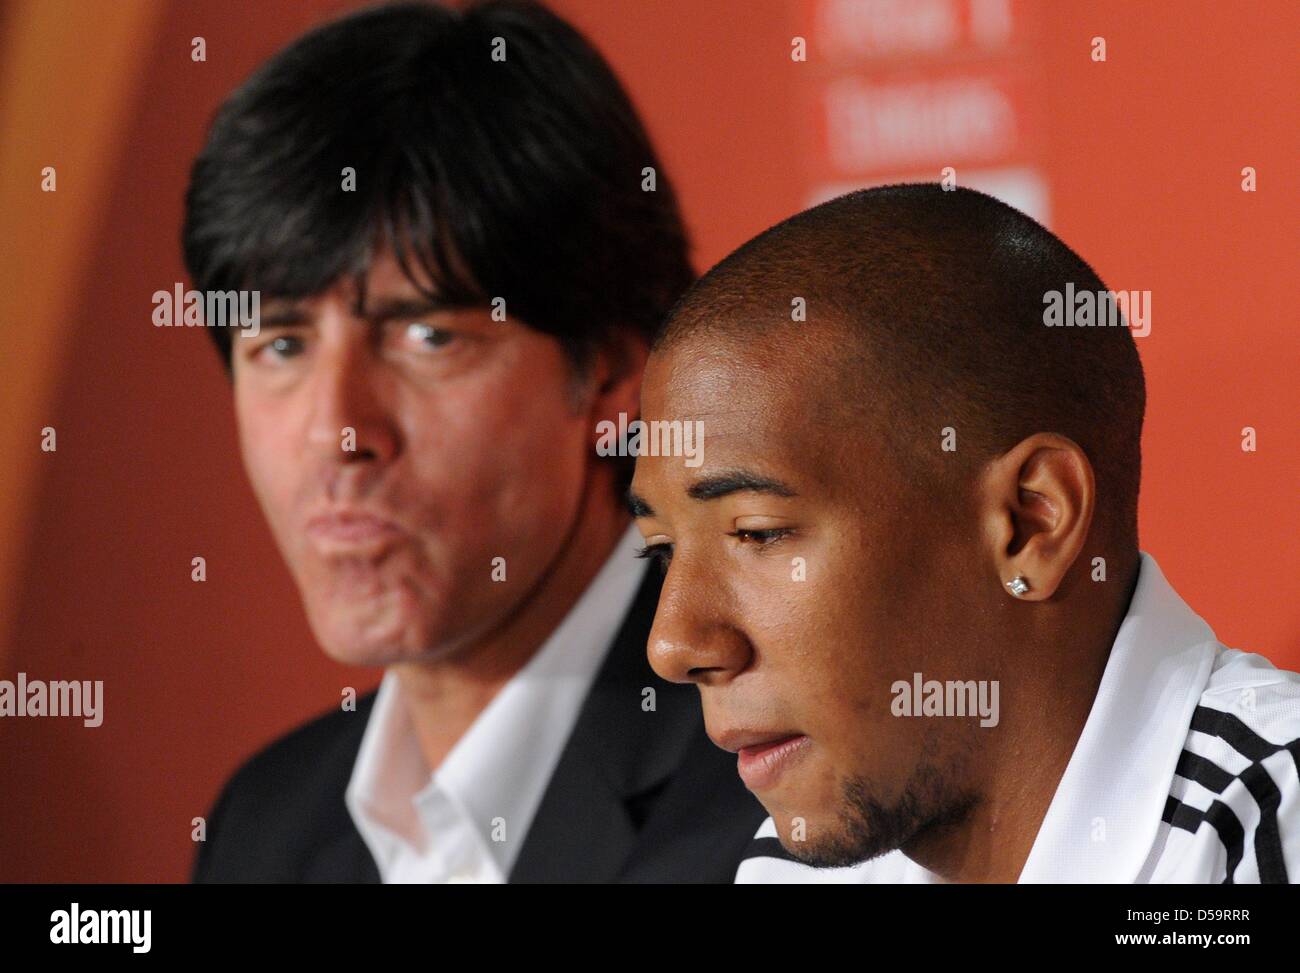 German headcoach Joachim Loew (L) and player Jerome Boateng during a press conference of the German team at the Green Point Stadium in Cape Town, South Africa 02 July 2010. Photo: Marcus Brandt dpa - Please refer to http://dpaq.de/FIFA-WM2010-TC  +++(c) dpa - Bildfunk+++ Stock Photo